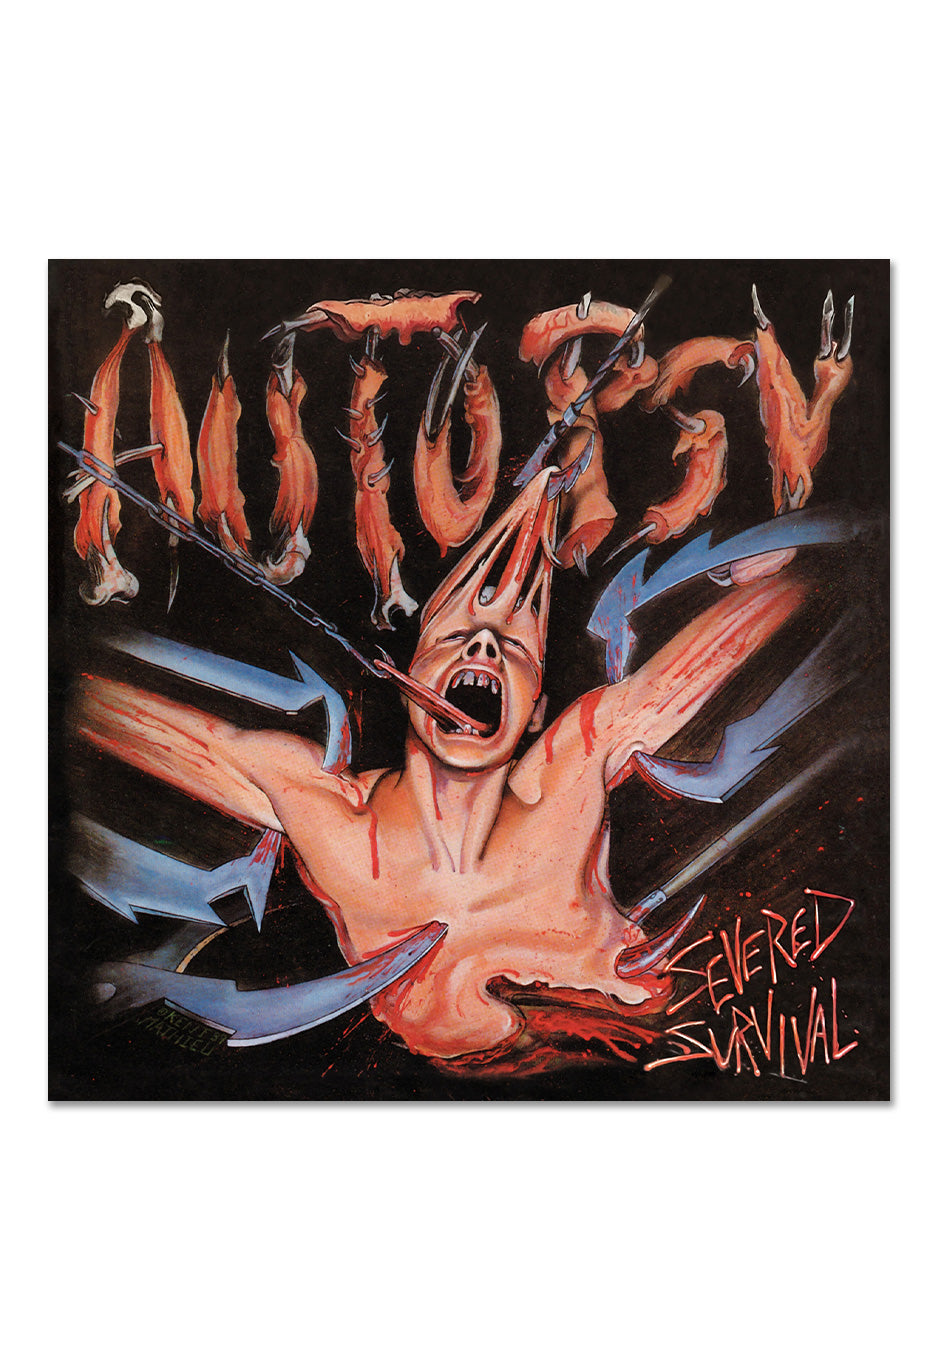 Autopsy - Severed Survival (35th Anniversary - Red Cover) Ltd. Red/Black - Marbled Vinyl